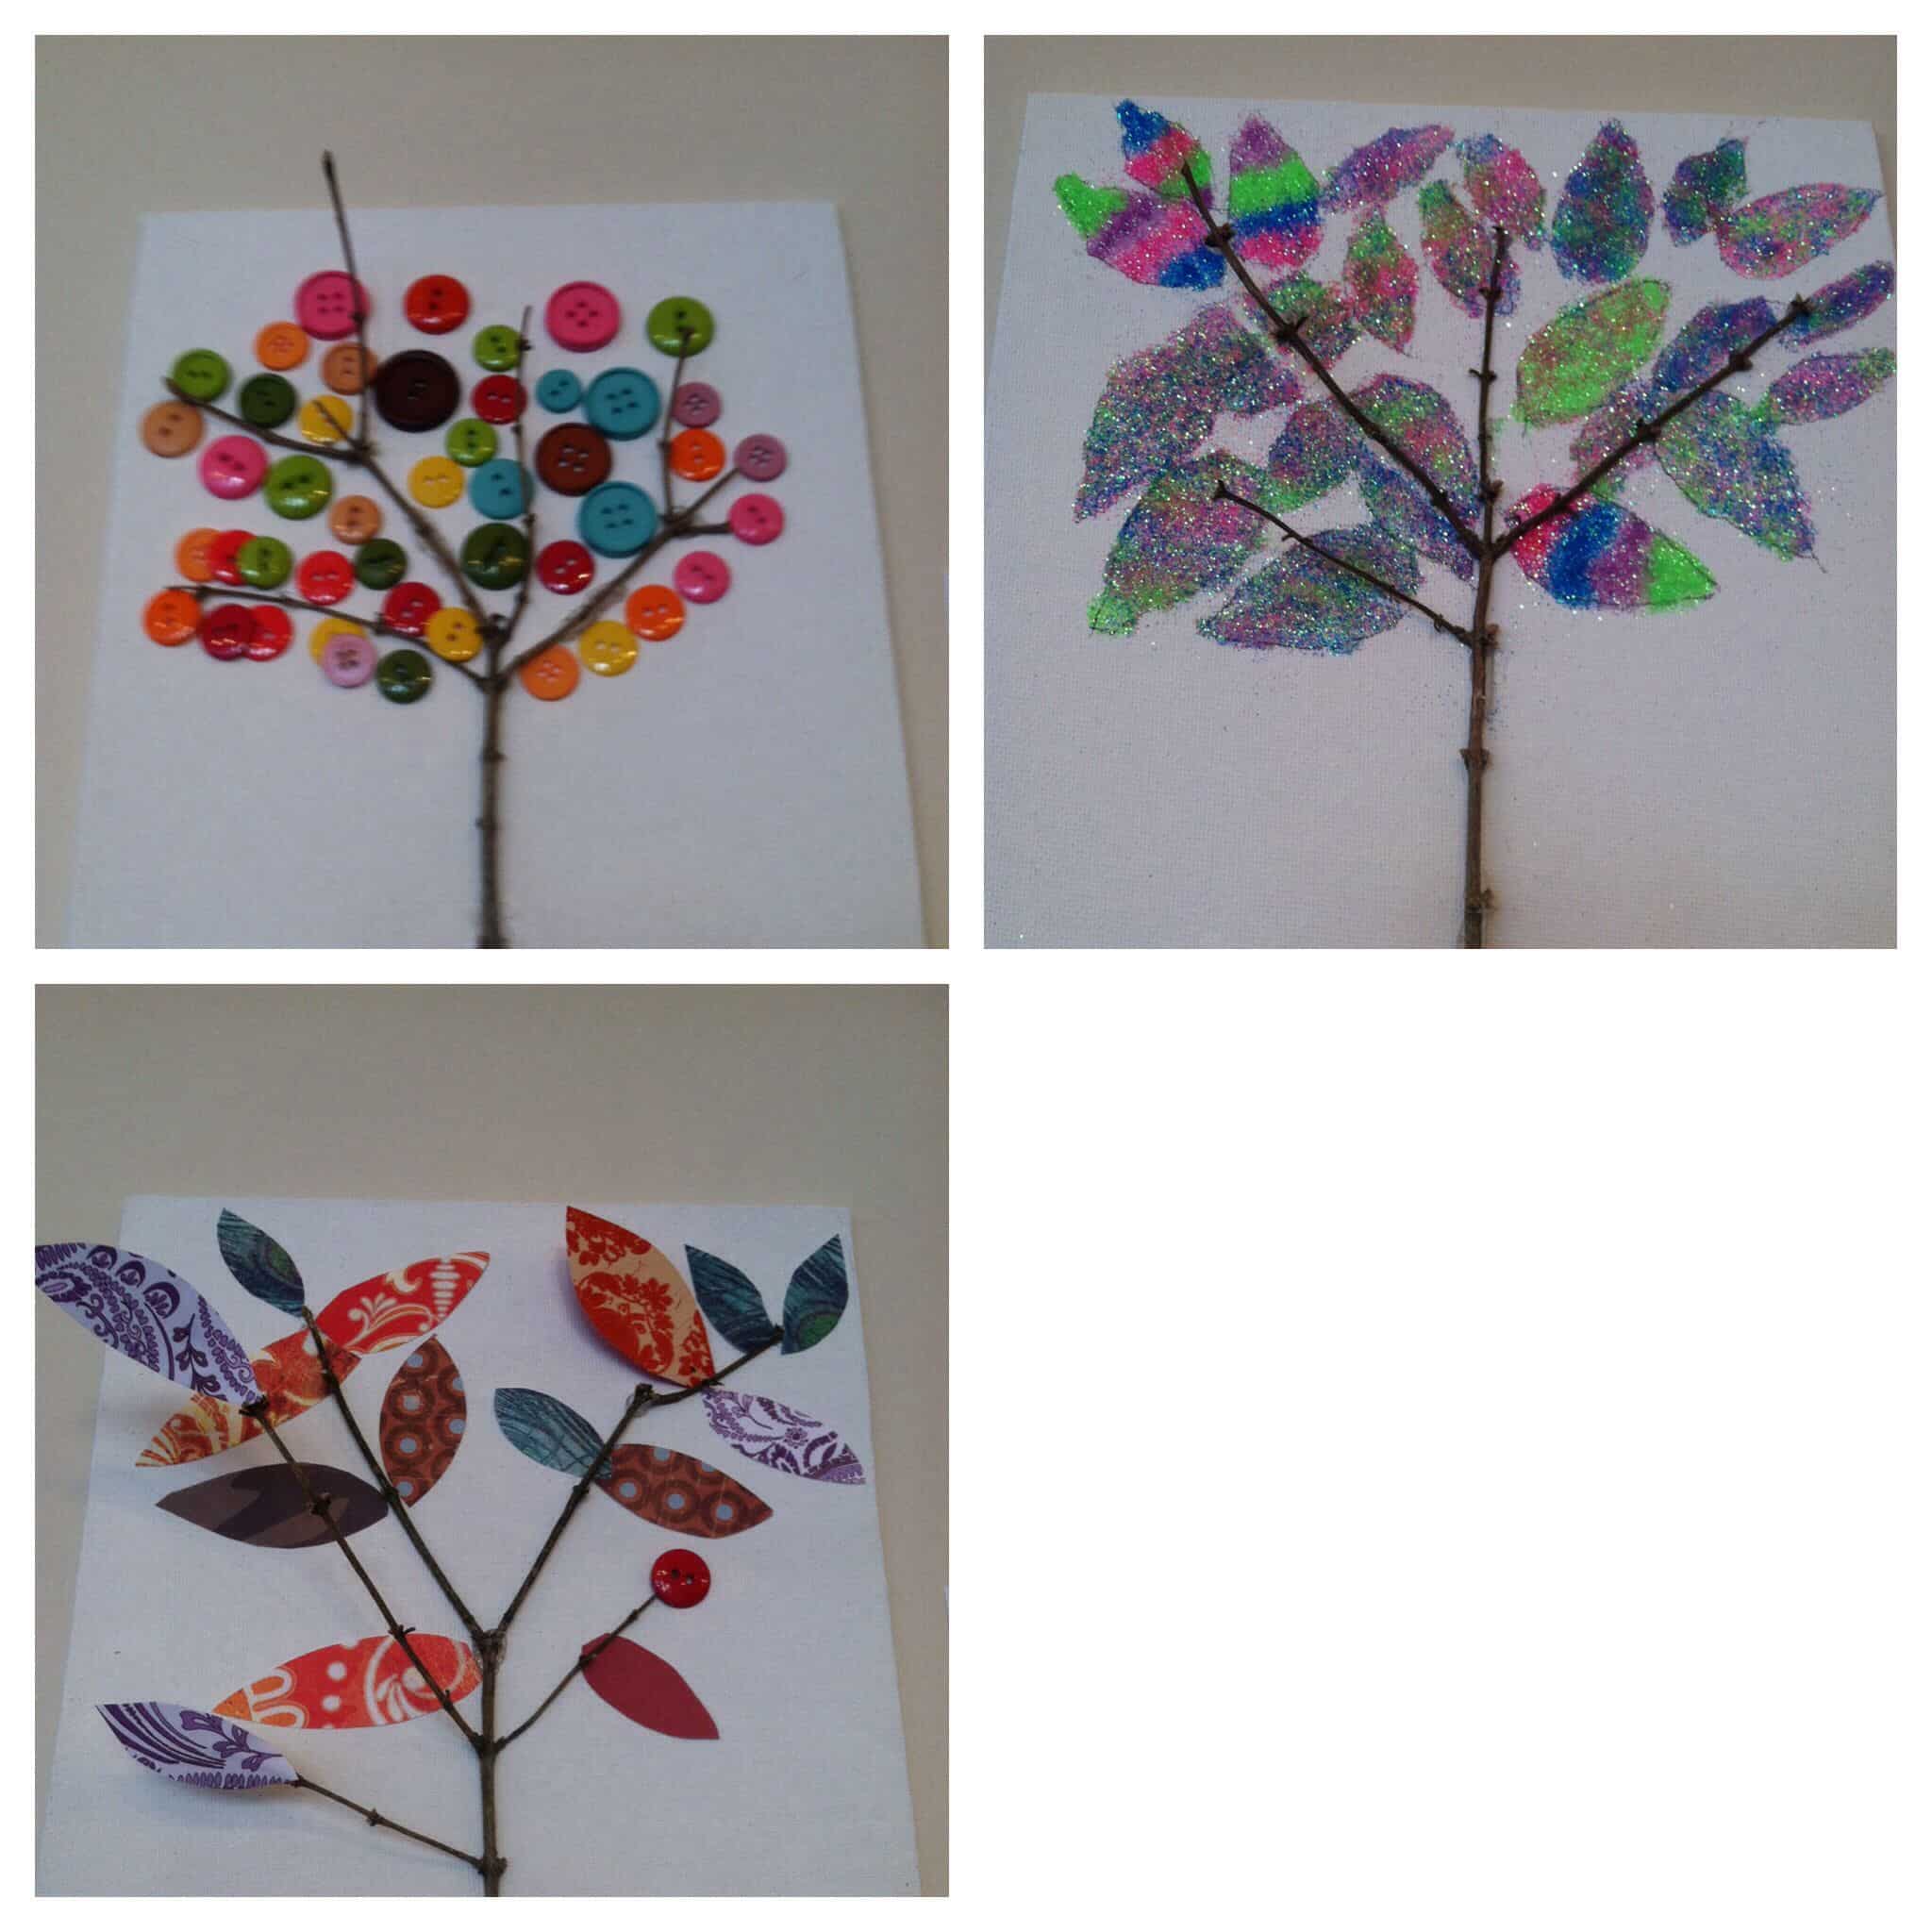 Arts And Crafts For Seniors With Dementia / Dementia Action Week